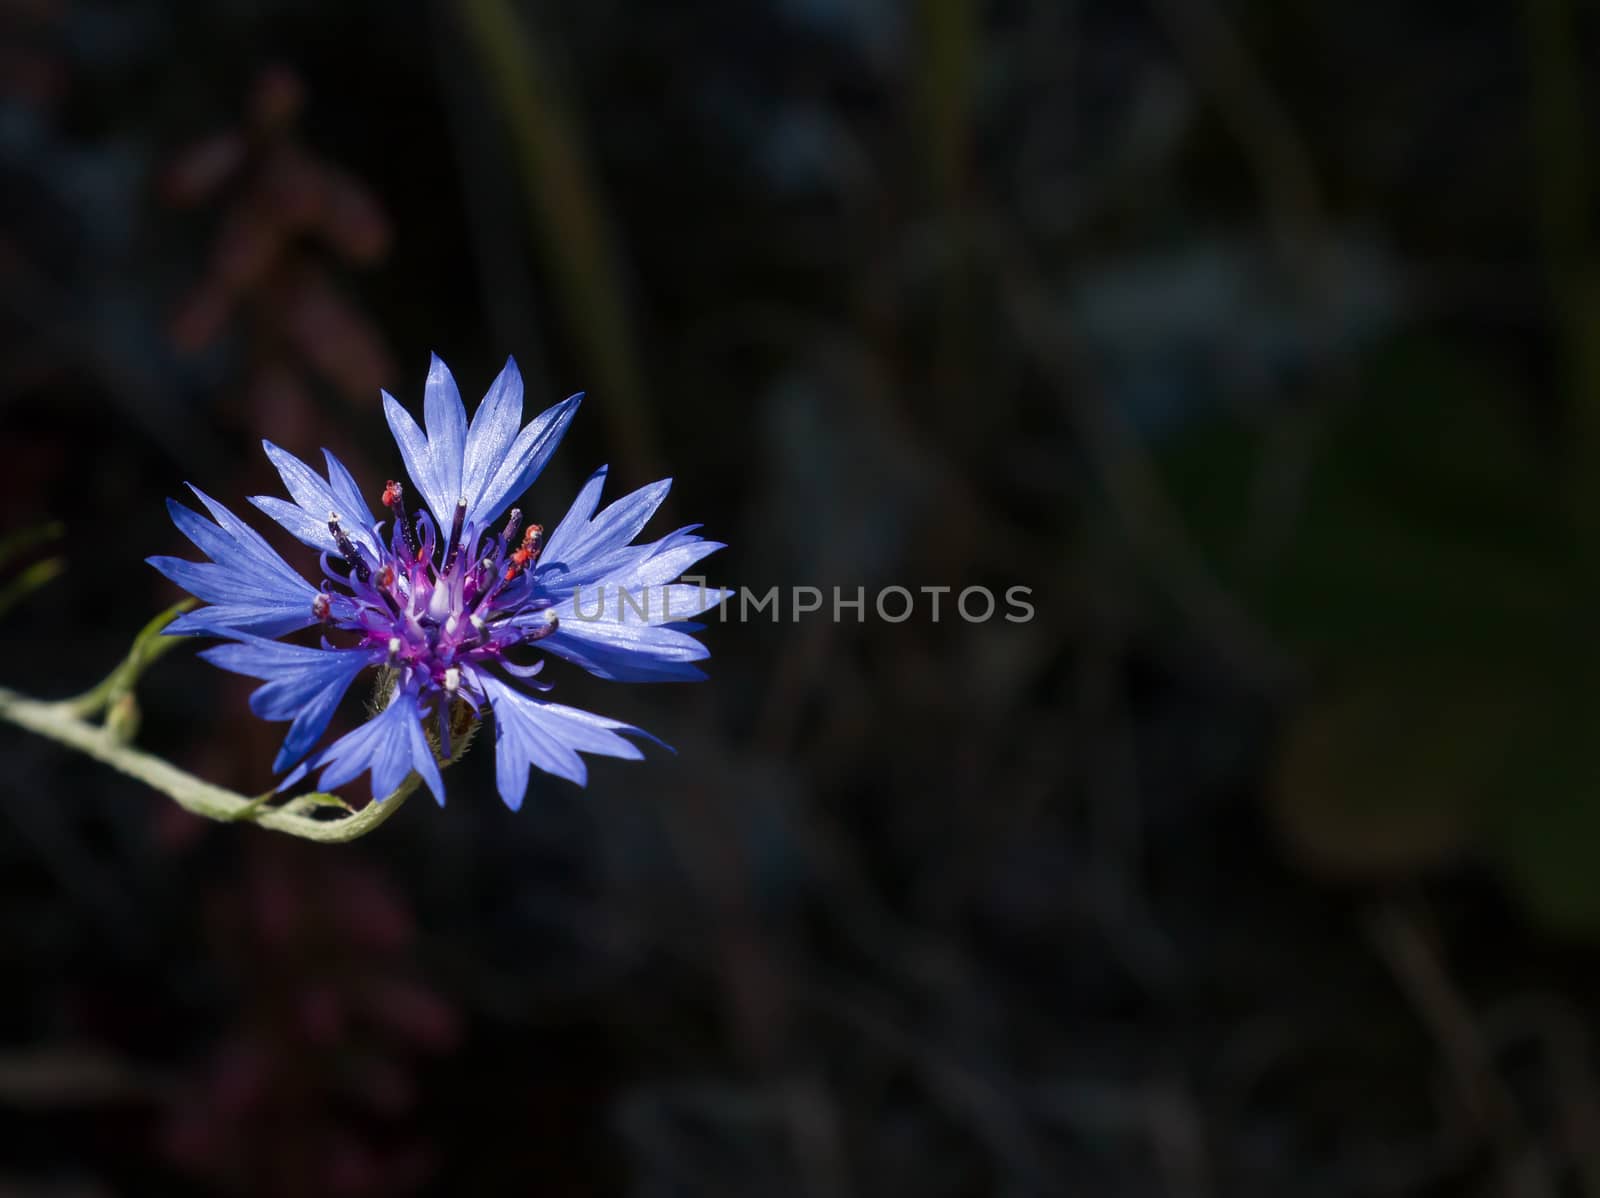 Vivid blue Cornflower against dark background with space for copy or text.